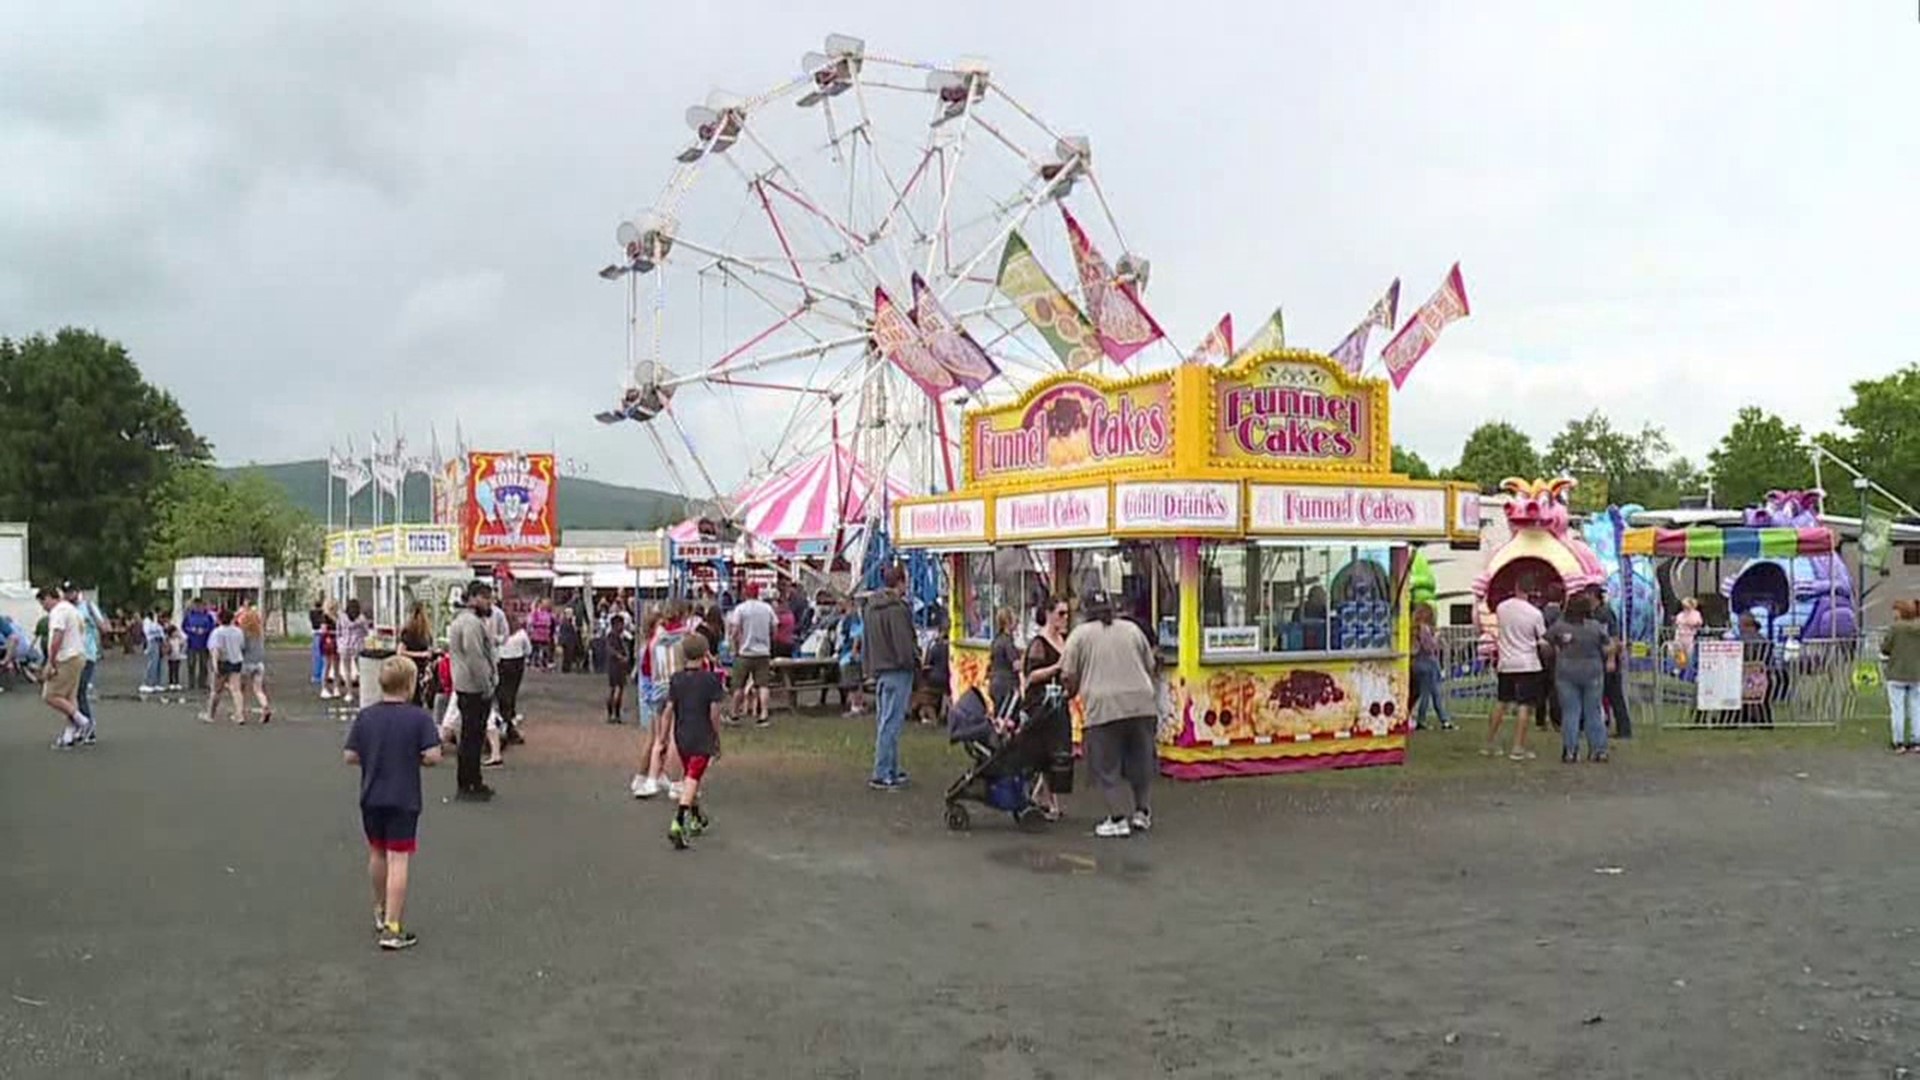 The 30th annual firemen's carnival at Jessup Hose Company #2 in Lackawanna County welcomed folks Saturday to the Memorial Day weekend festivities.